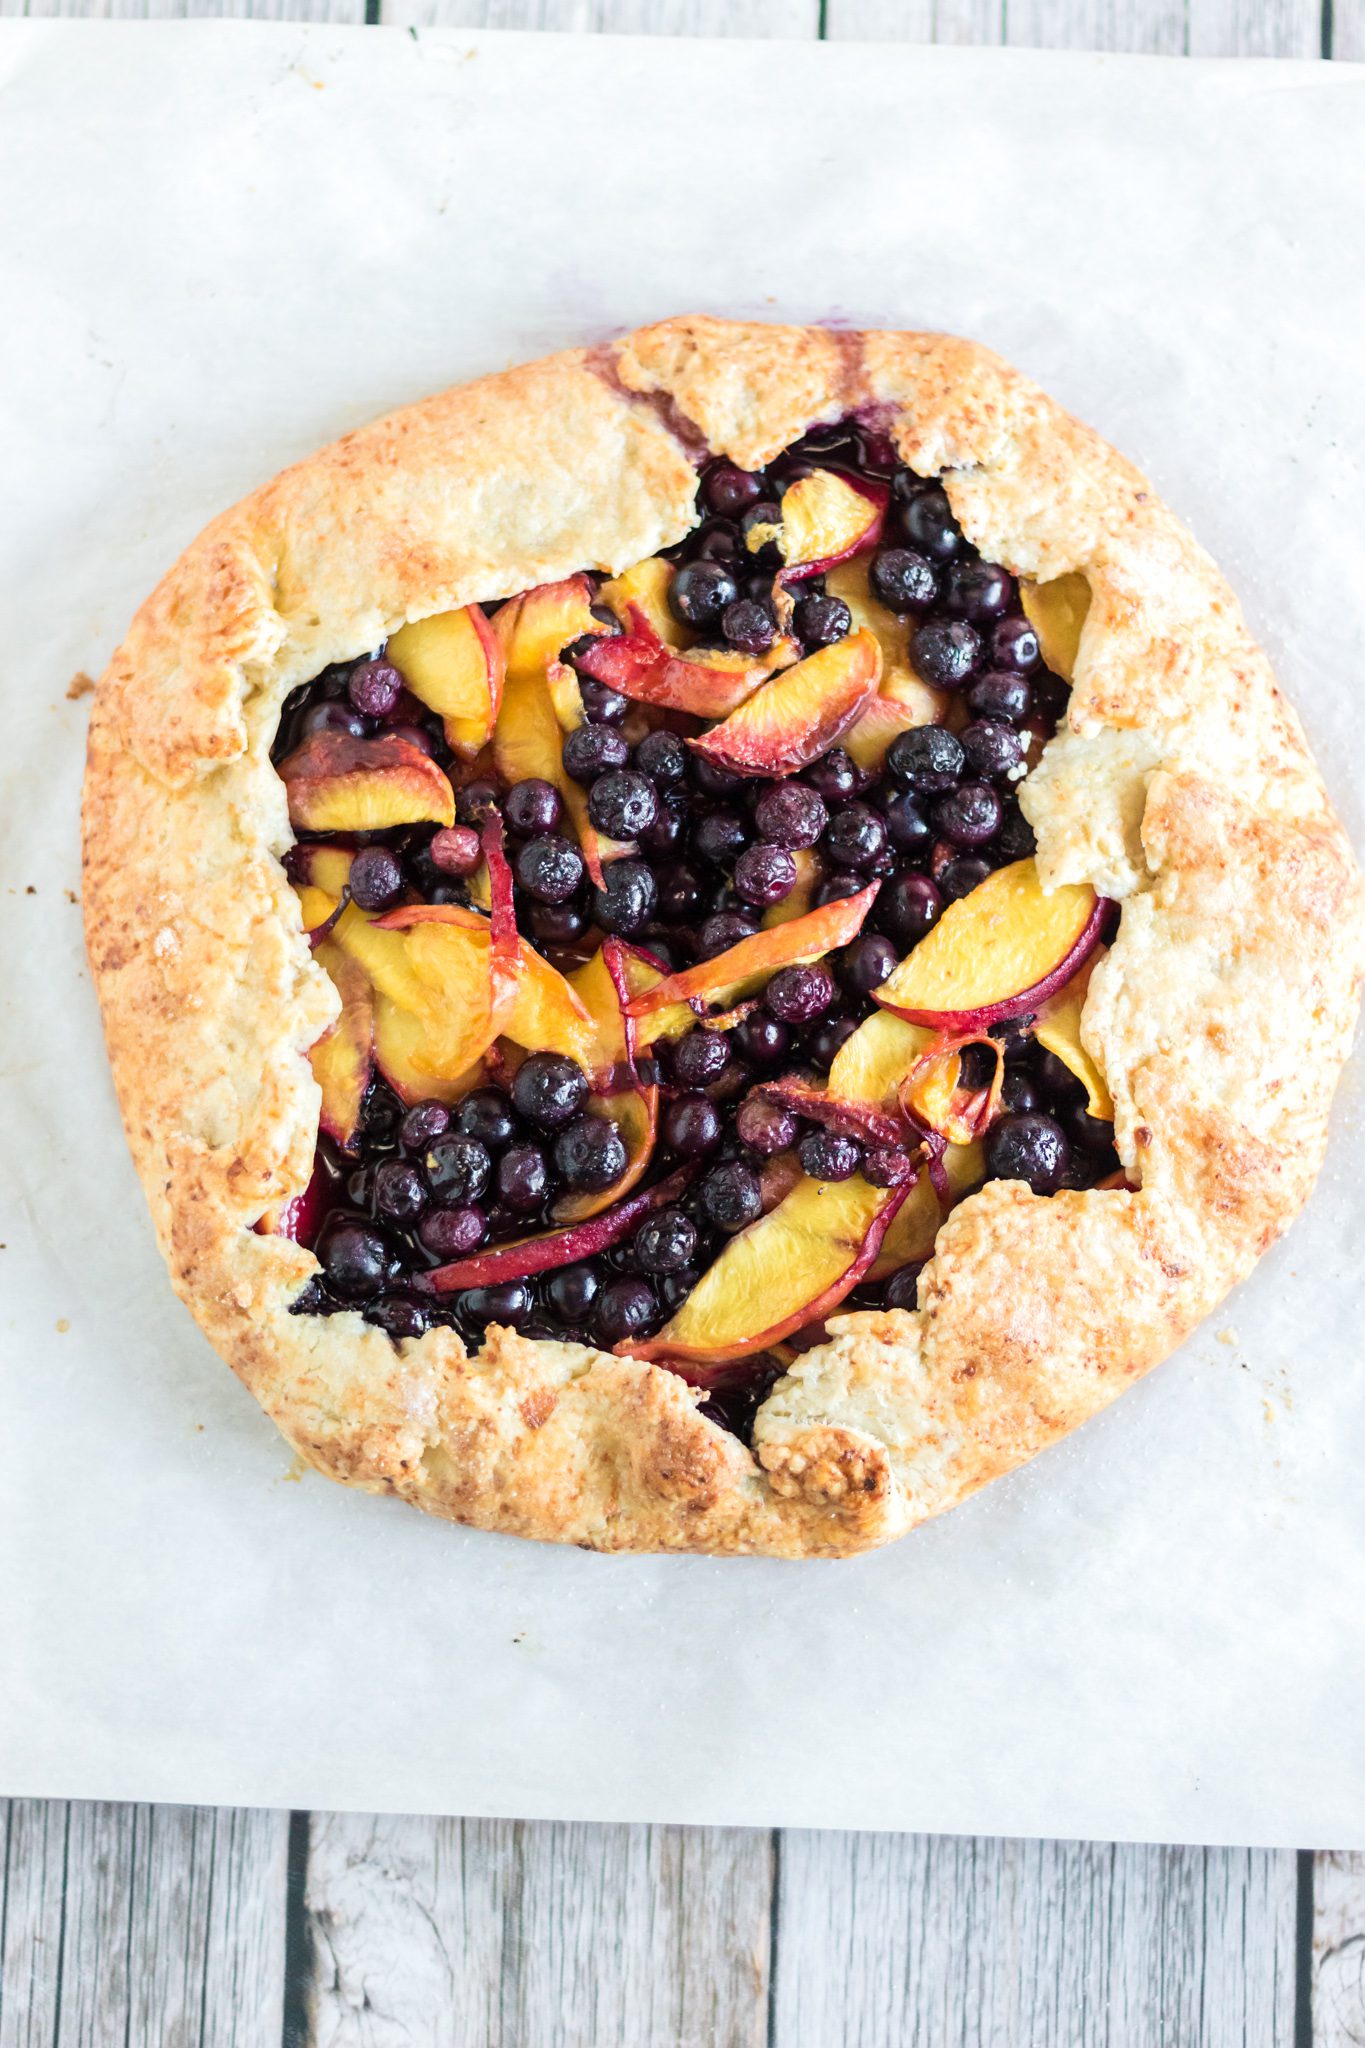 How To Make Blueberry Peach Galette